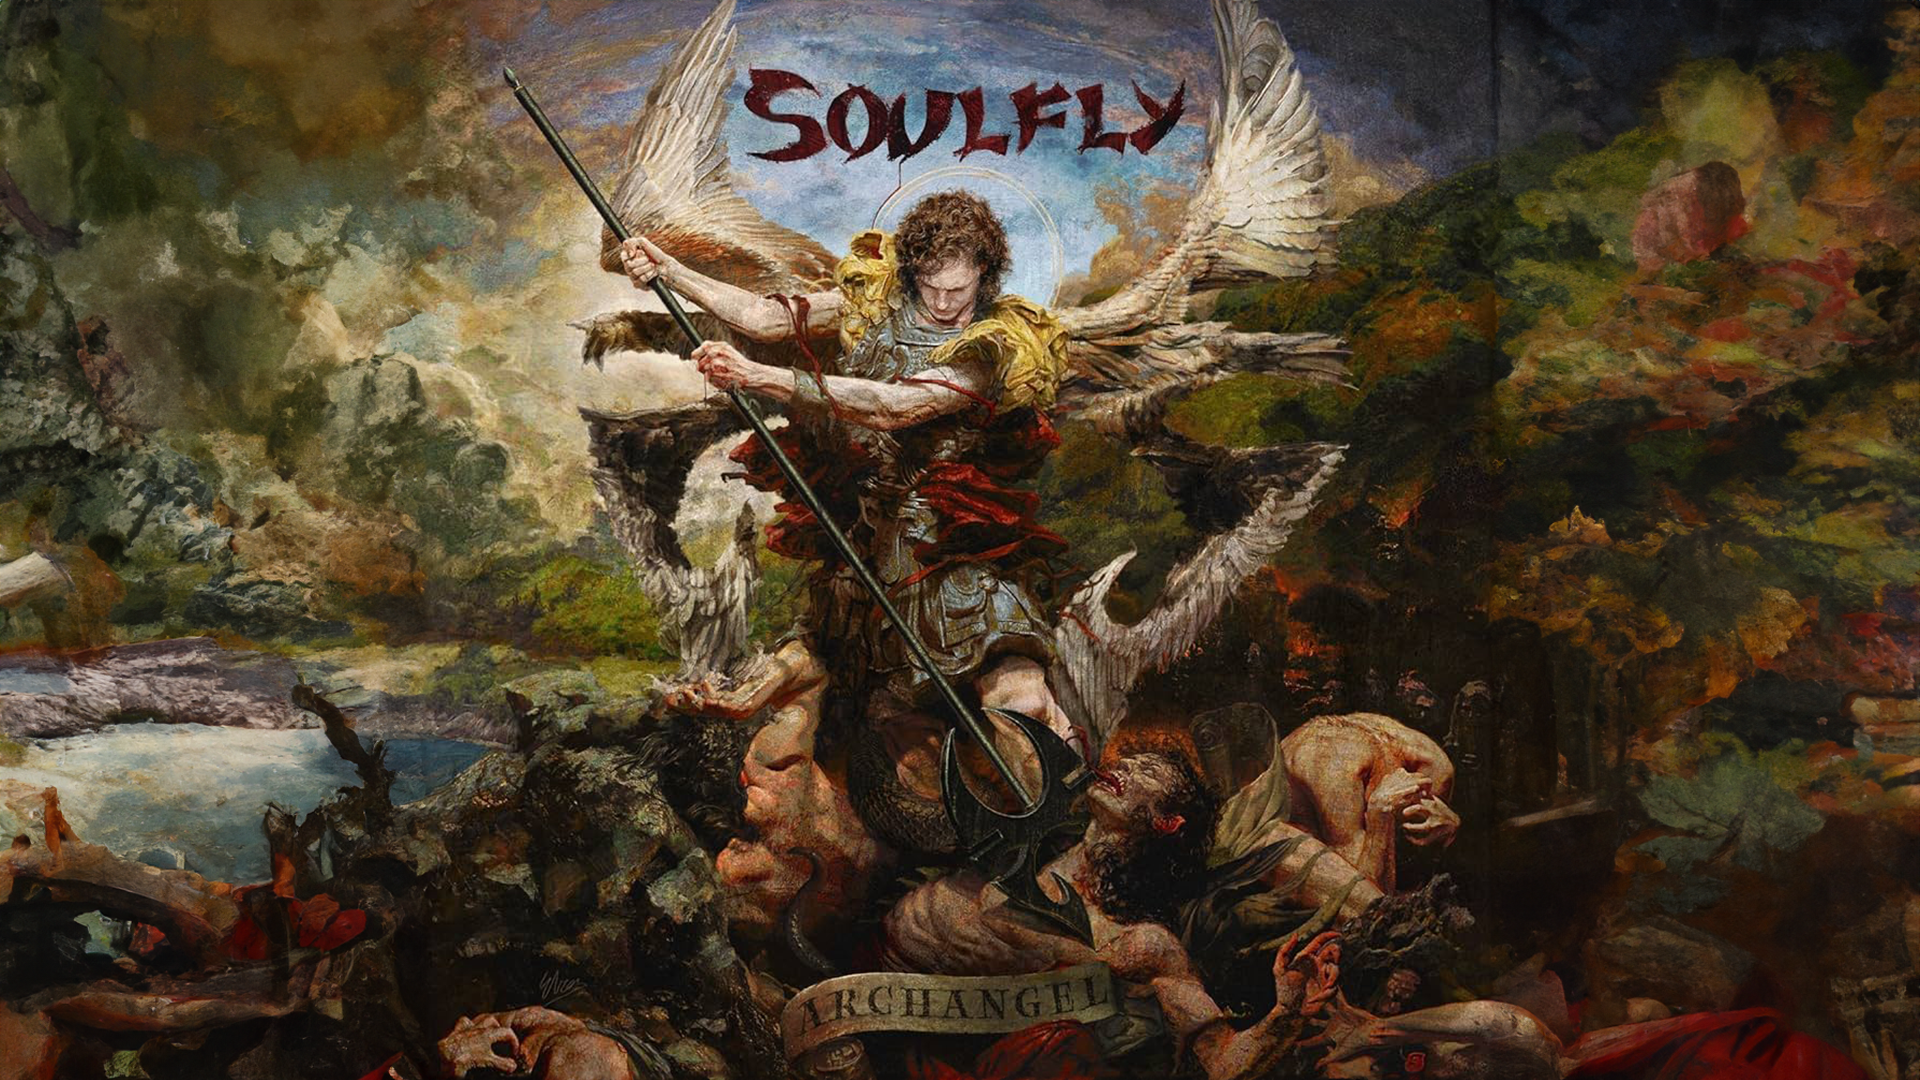 General 1920x1080 metal band Soulfly band wings men album covers religious weapon blood artwork